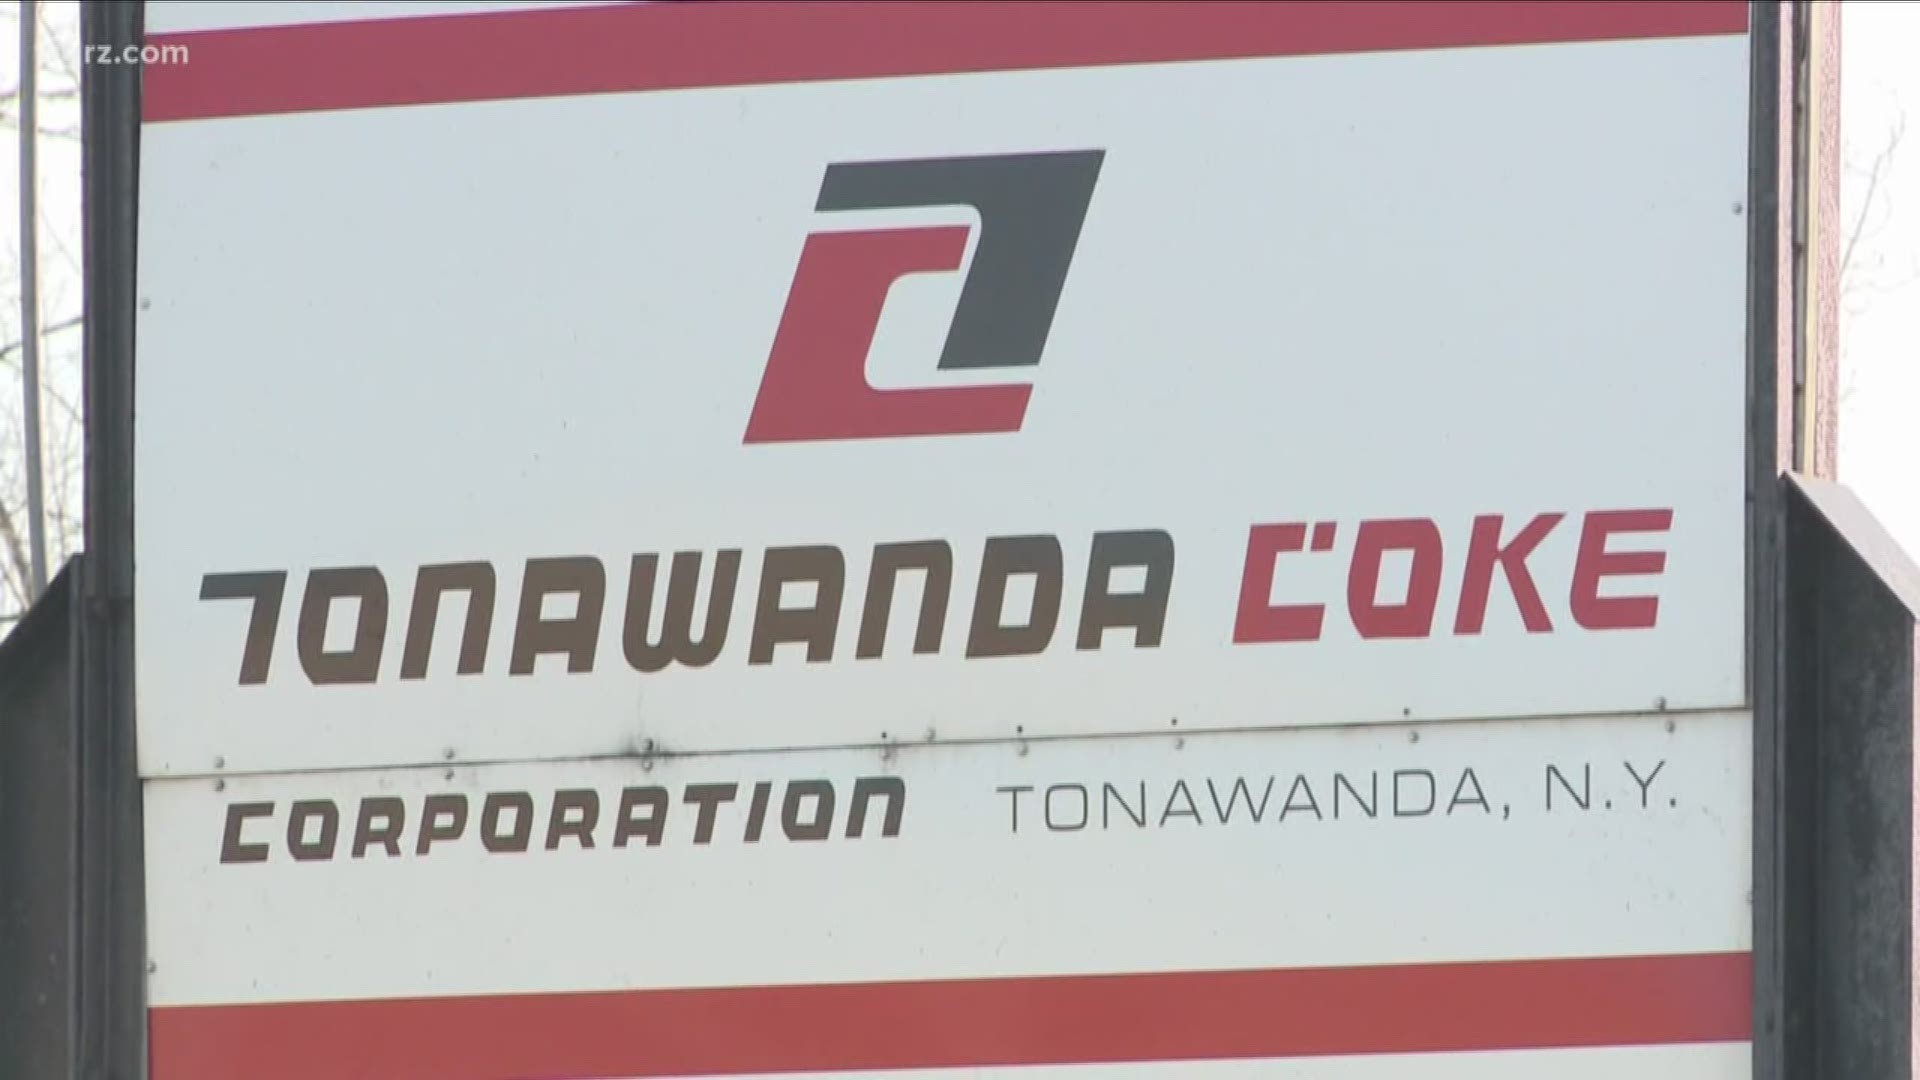 A cold war has developed between two groups once united in efforts, to assist those affected by pollution from Tonawanda coke.